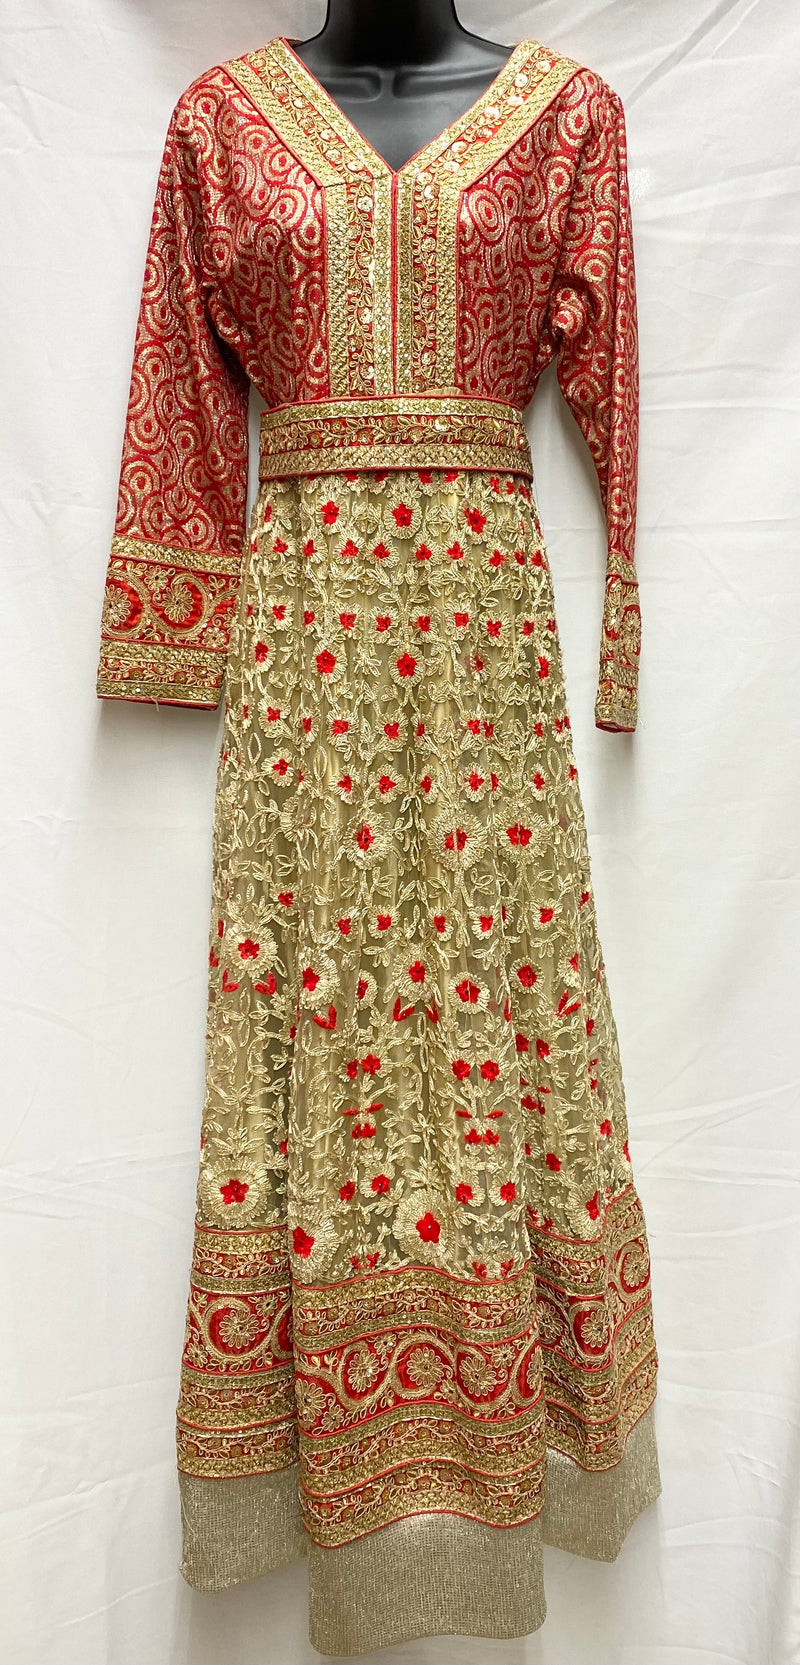 Kaftan dress laced & embroidered with satin underskirt Gold & Red stitching sizes [XL]